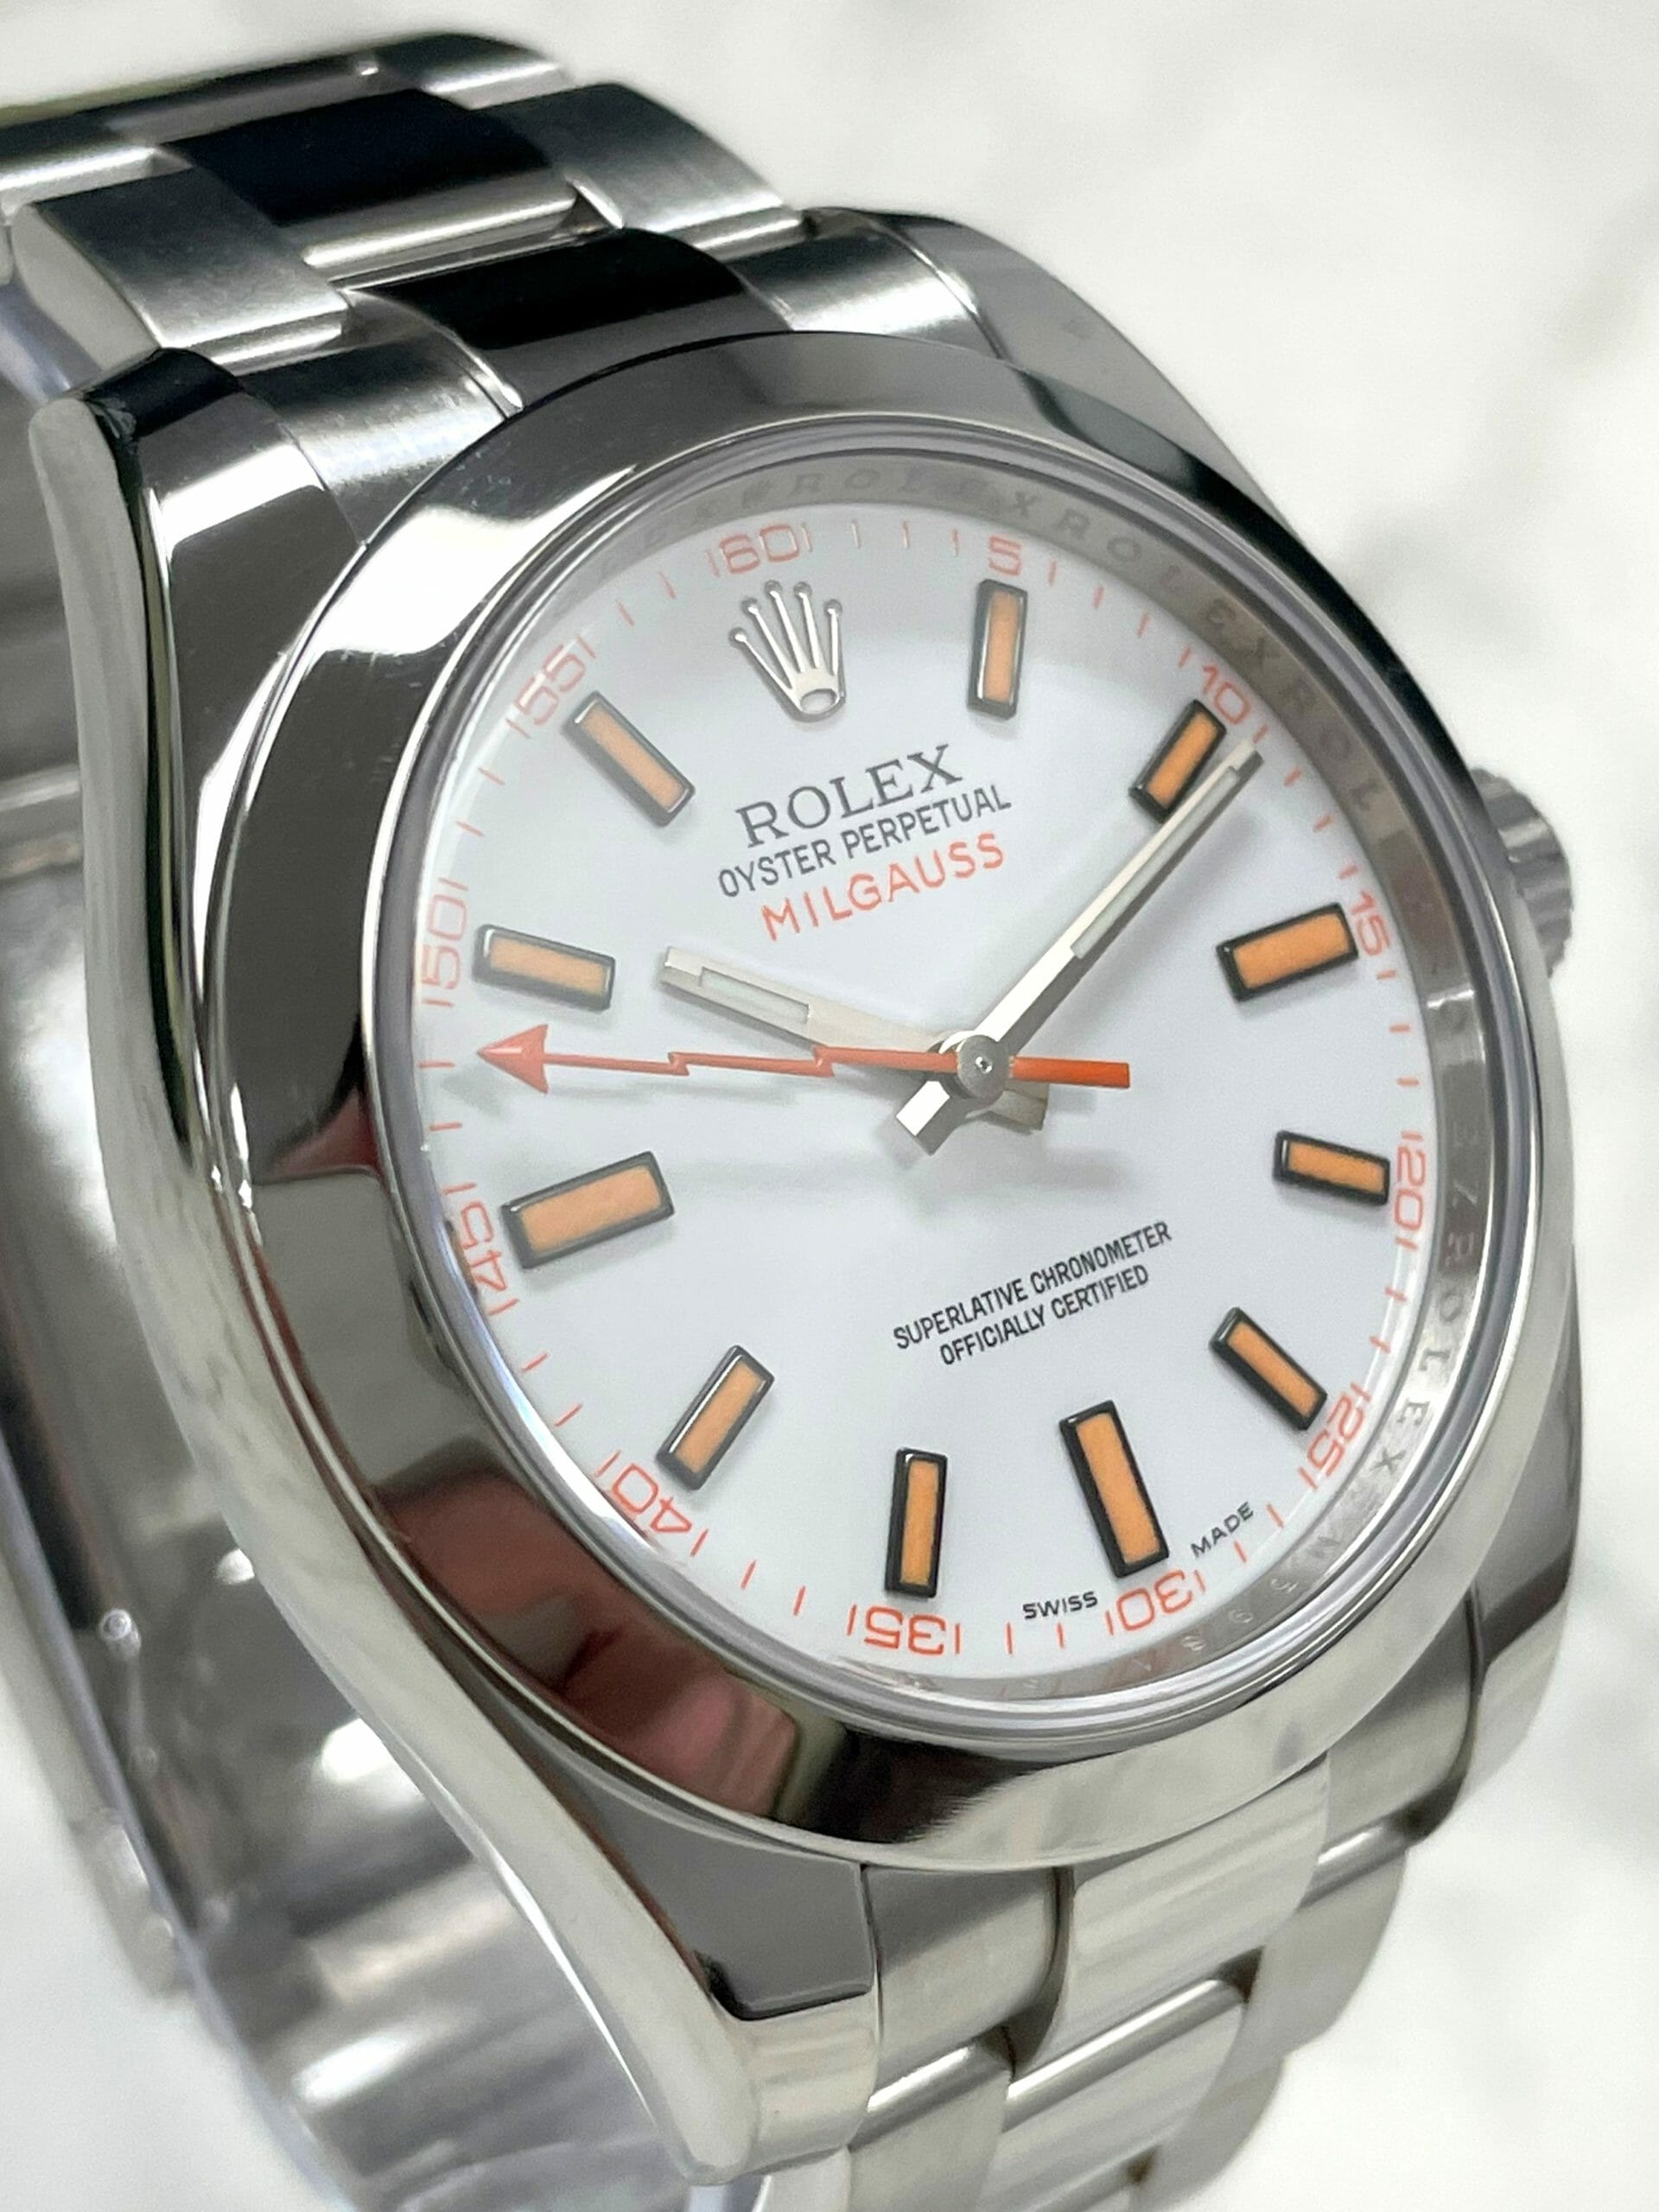 Rolex - 116400 - Milgauss - Stainless Steel - White Dial - M Serial ...